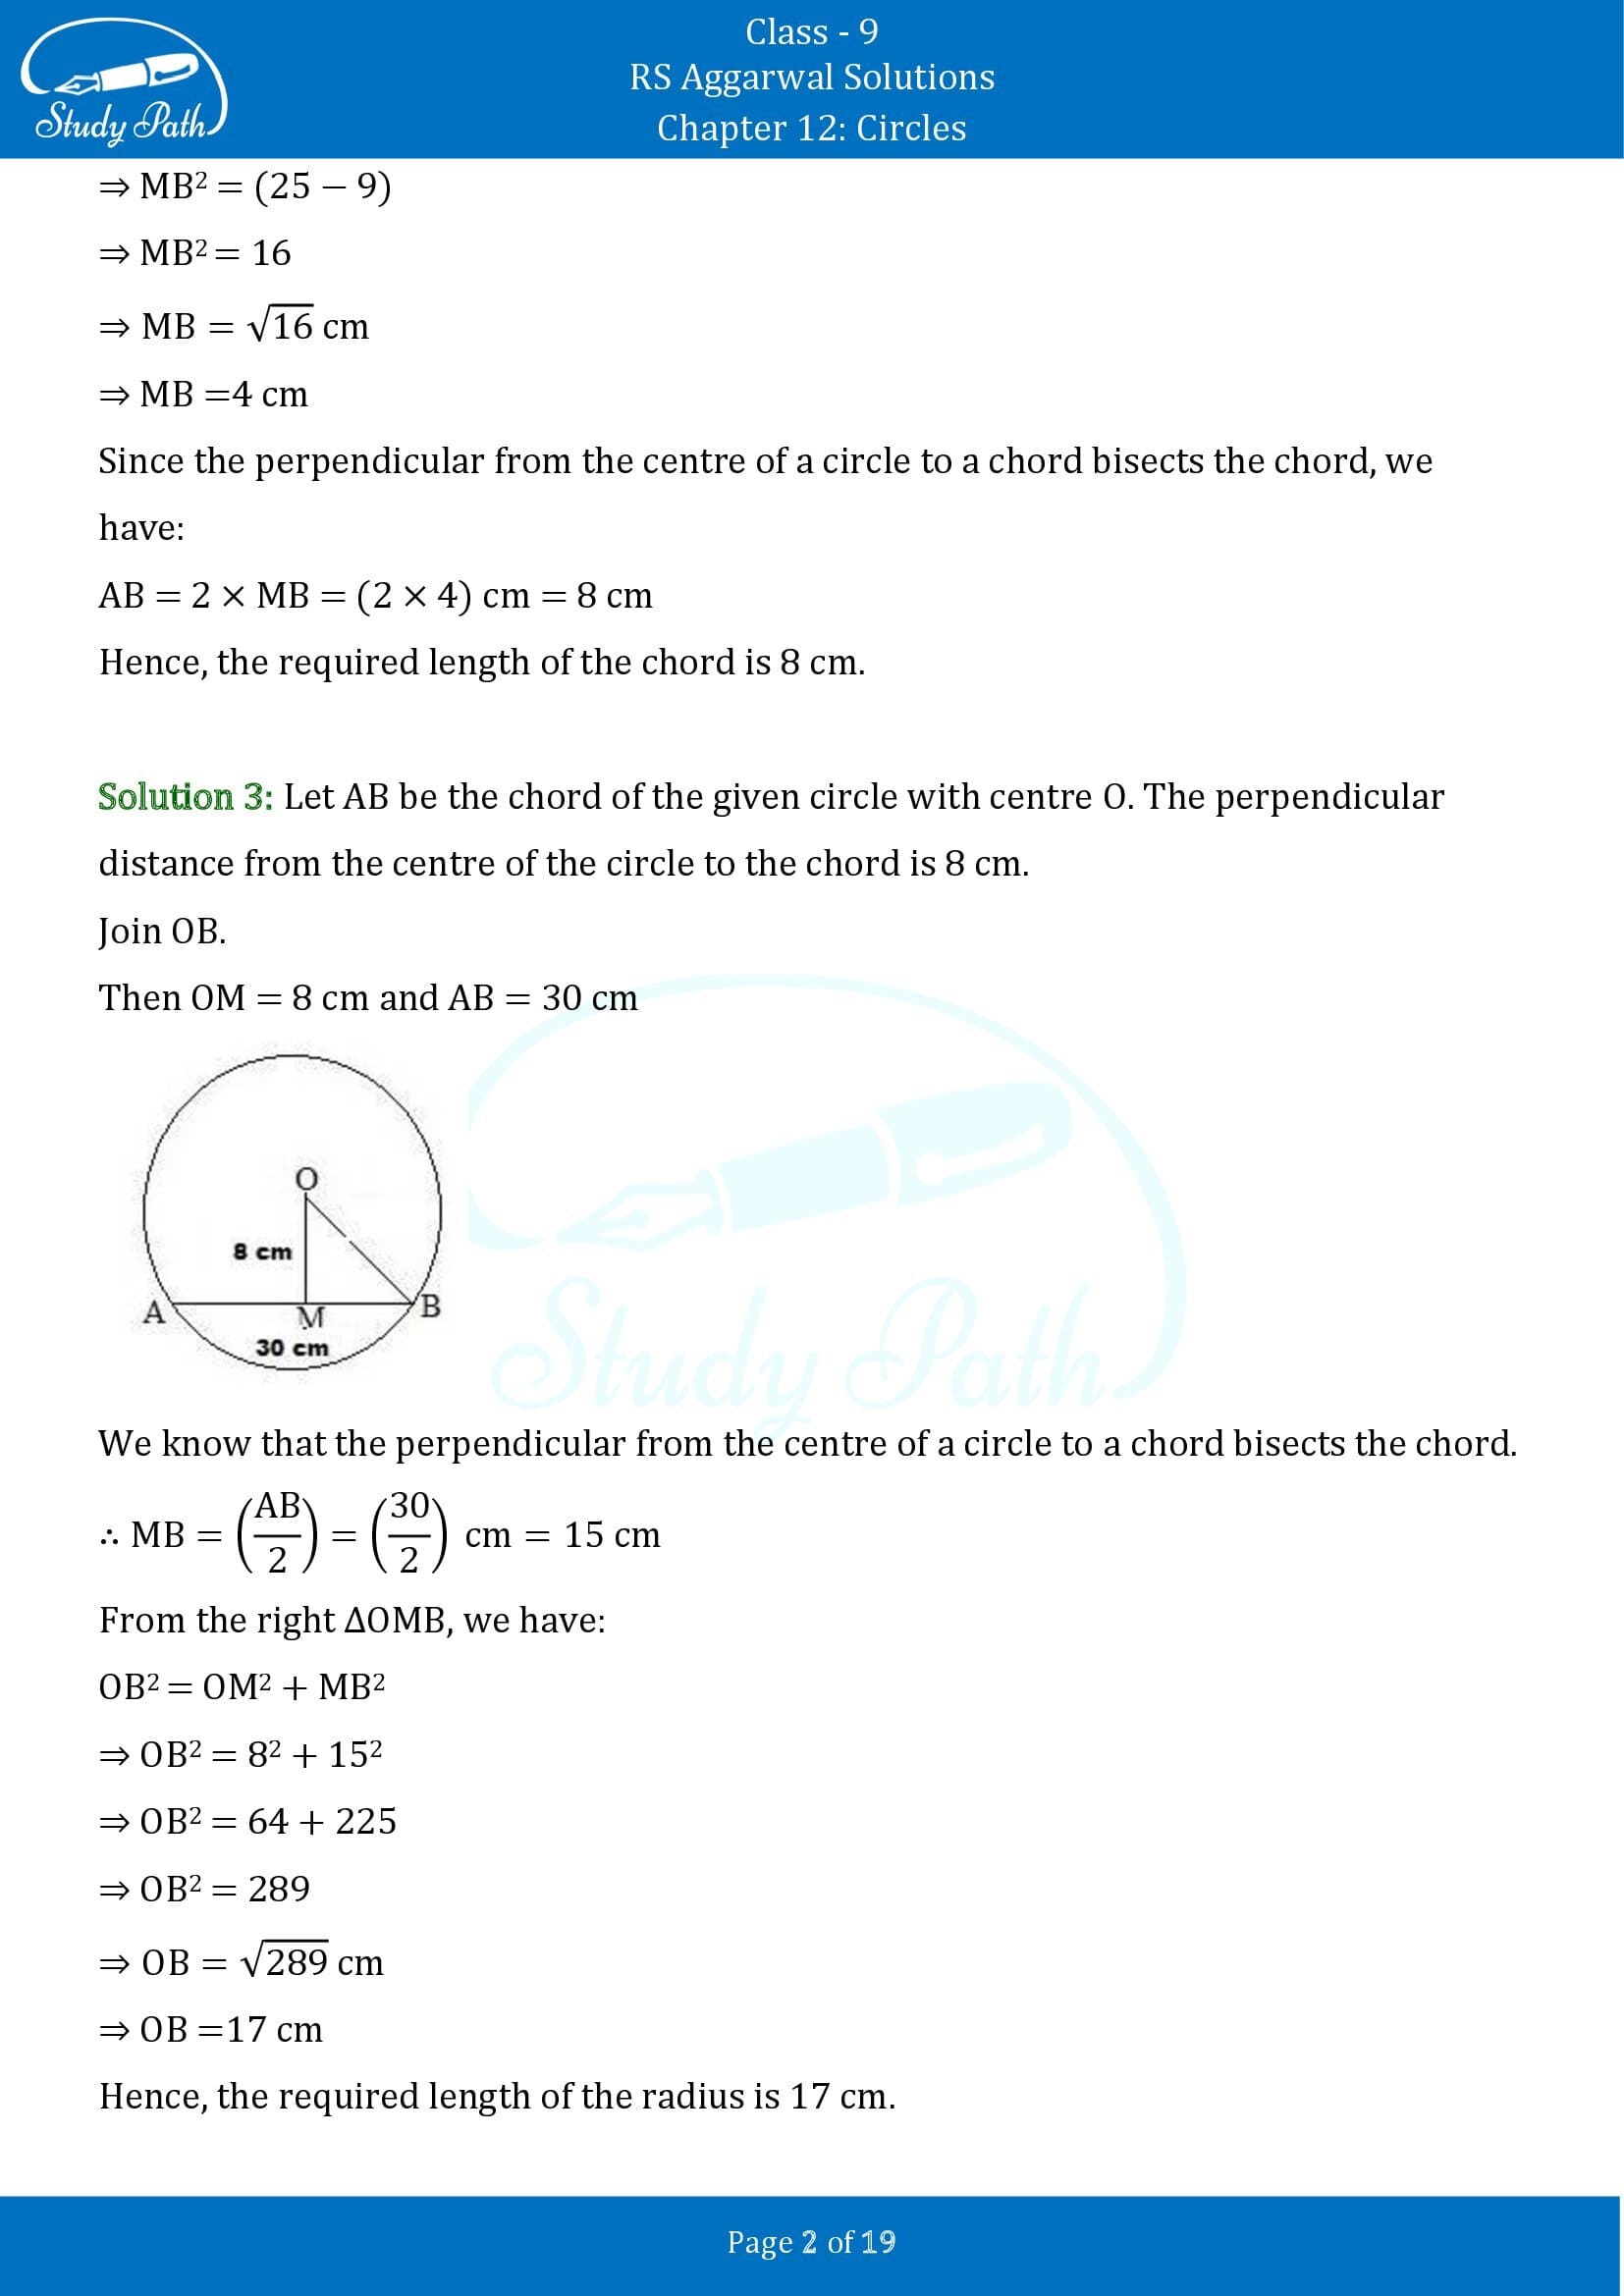 RS Aggarwal Solutions Class 9 Chapter 12 Circles Exercise 12A 00002